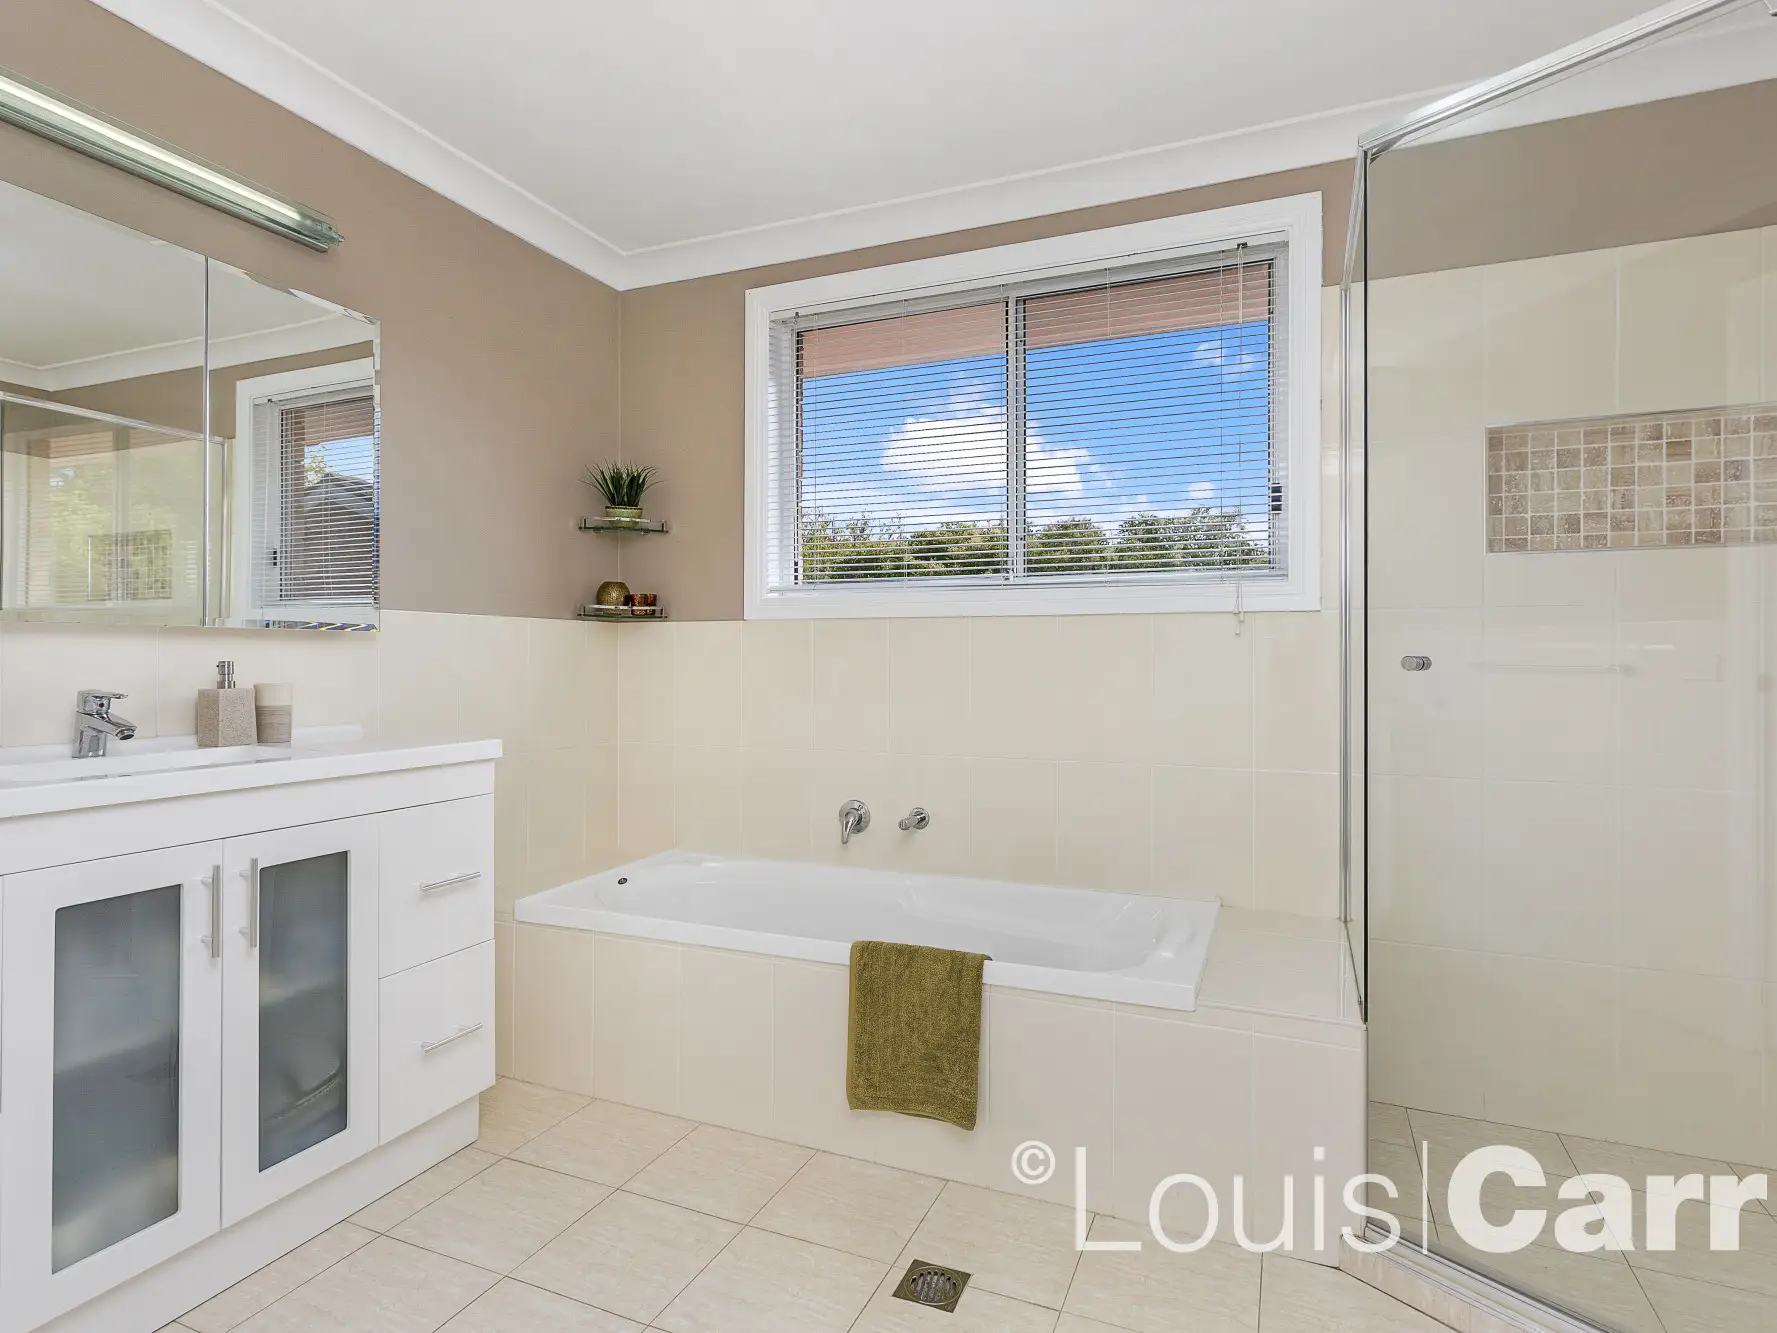 Photo #9: 6 Pineview Place, Dural - Sold by Louis Carr Real Estate